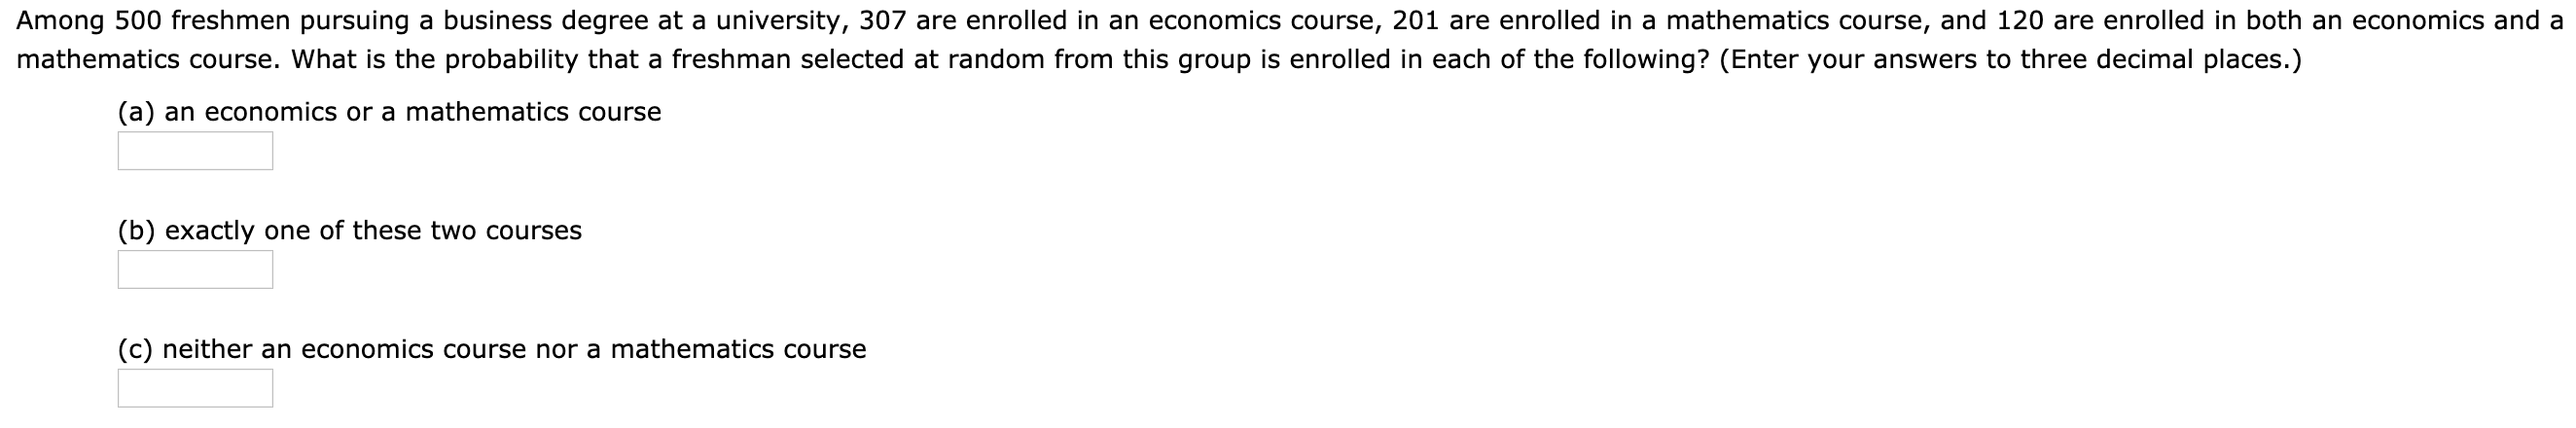 Among 500 freshmen pursuing a business degree at a university, 307 are enrolled in an economics course, 201 are enrolled in a mathematics course, and 120 are enrolled in both an economics and a
mathematics course. What is the probability that a freshman selected at random from this group is enrolled in each of the following? (Enter your answers to three decimal places.)
(a) an economics or a mathematics course
(b) exactly one of these two courses
(c) neither an economics course nor a mathematics course
